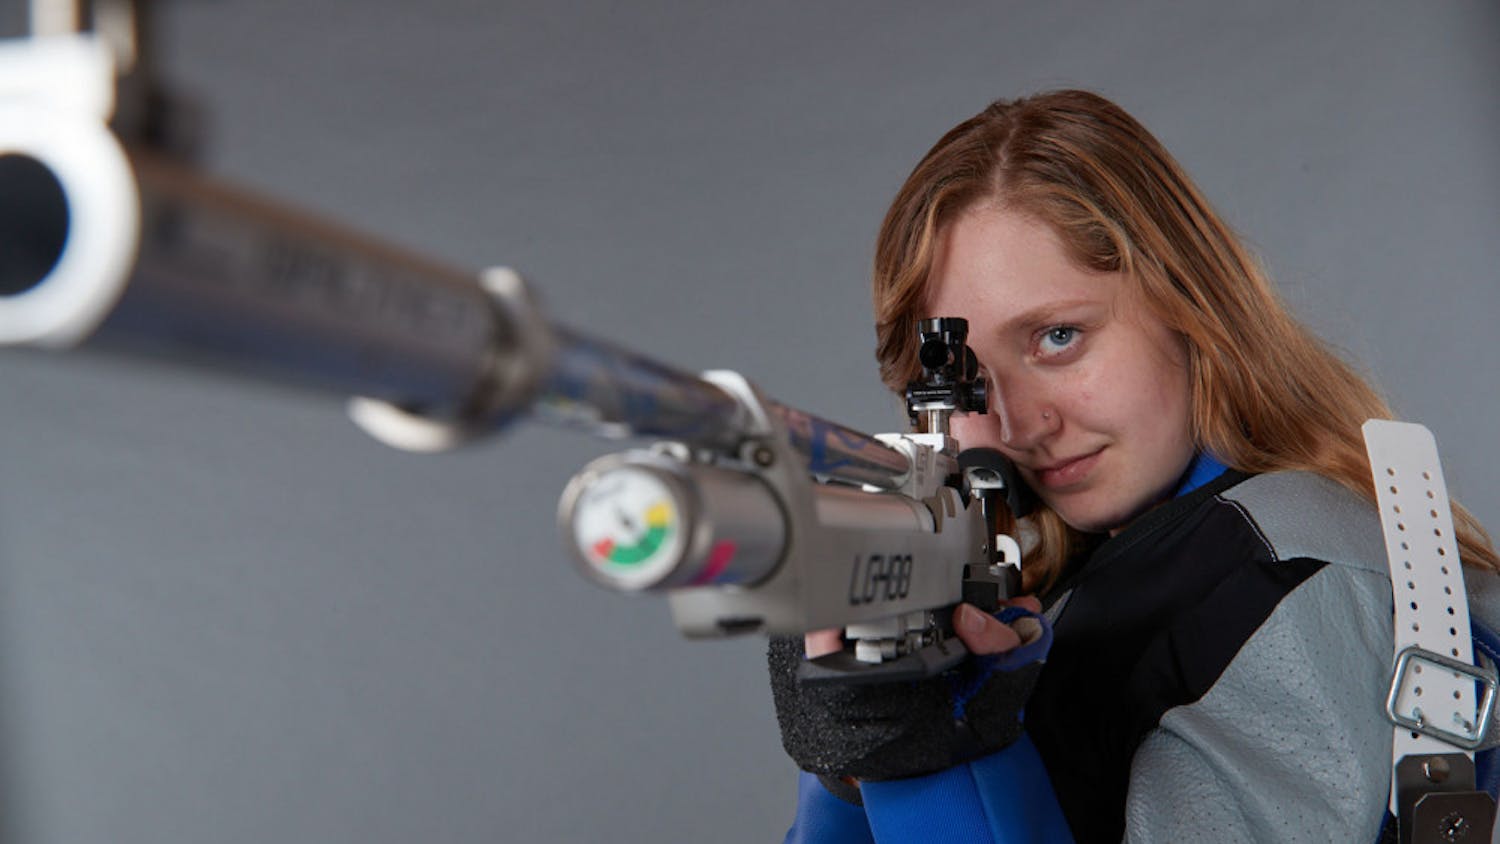 Taylor Gibson Rifle pic 03-05-20